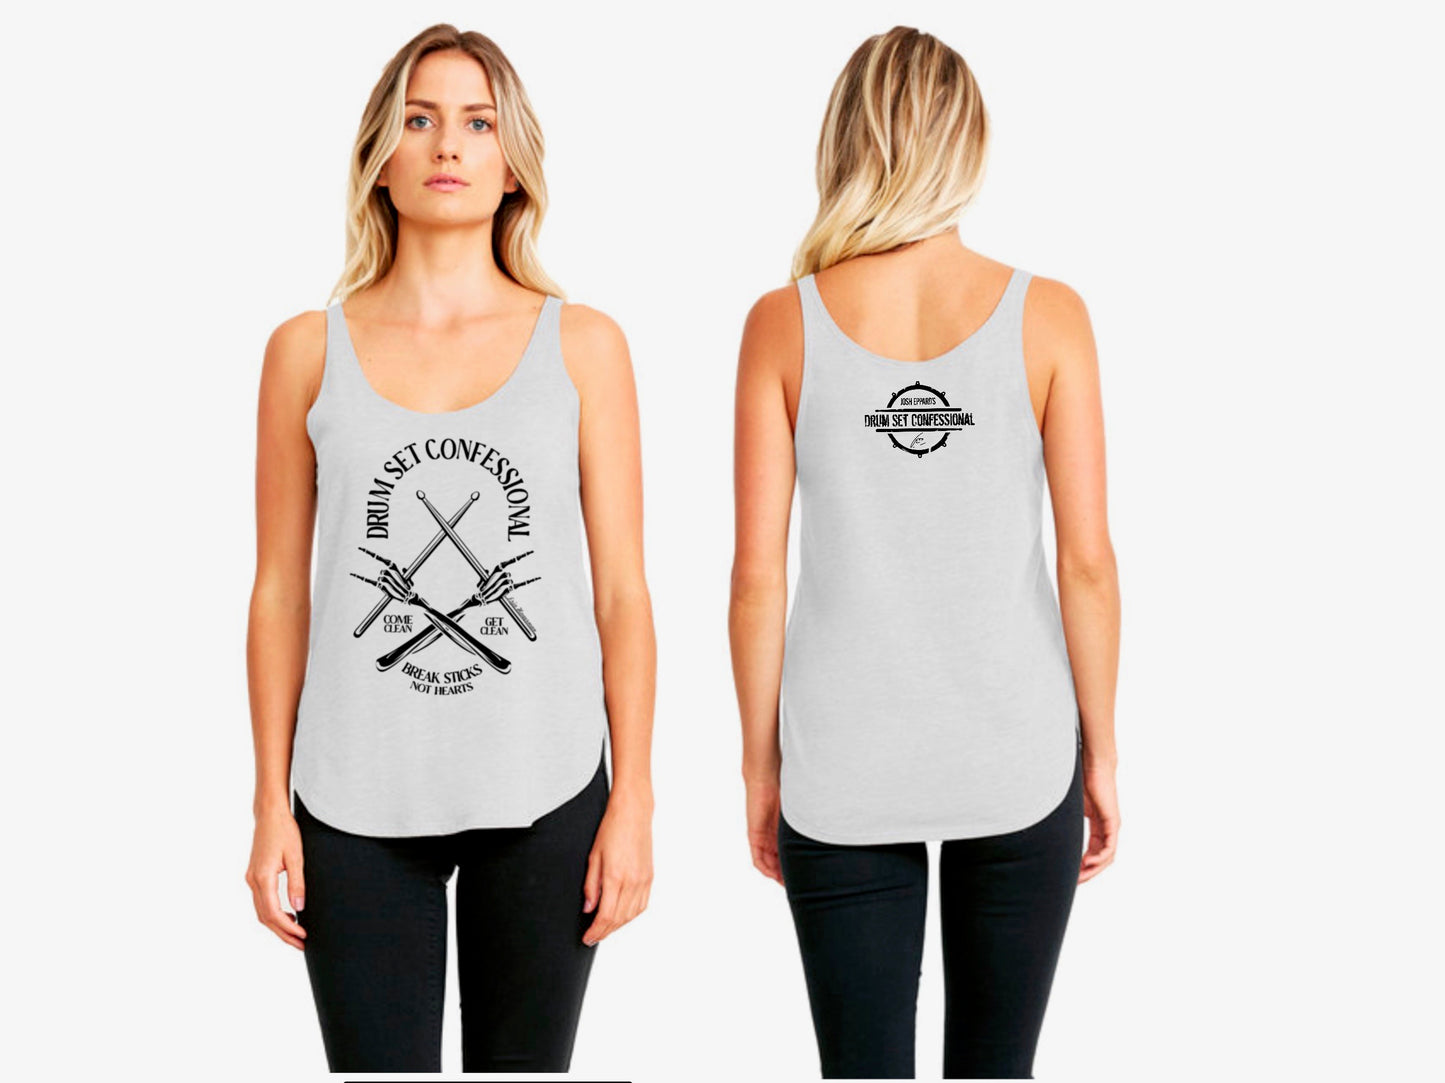 DSC "Bones" Gray Next Level Apparel Ladies' Festival Tank (100% of profits fuel outreach and donations to addiction/recovery causes.)